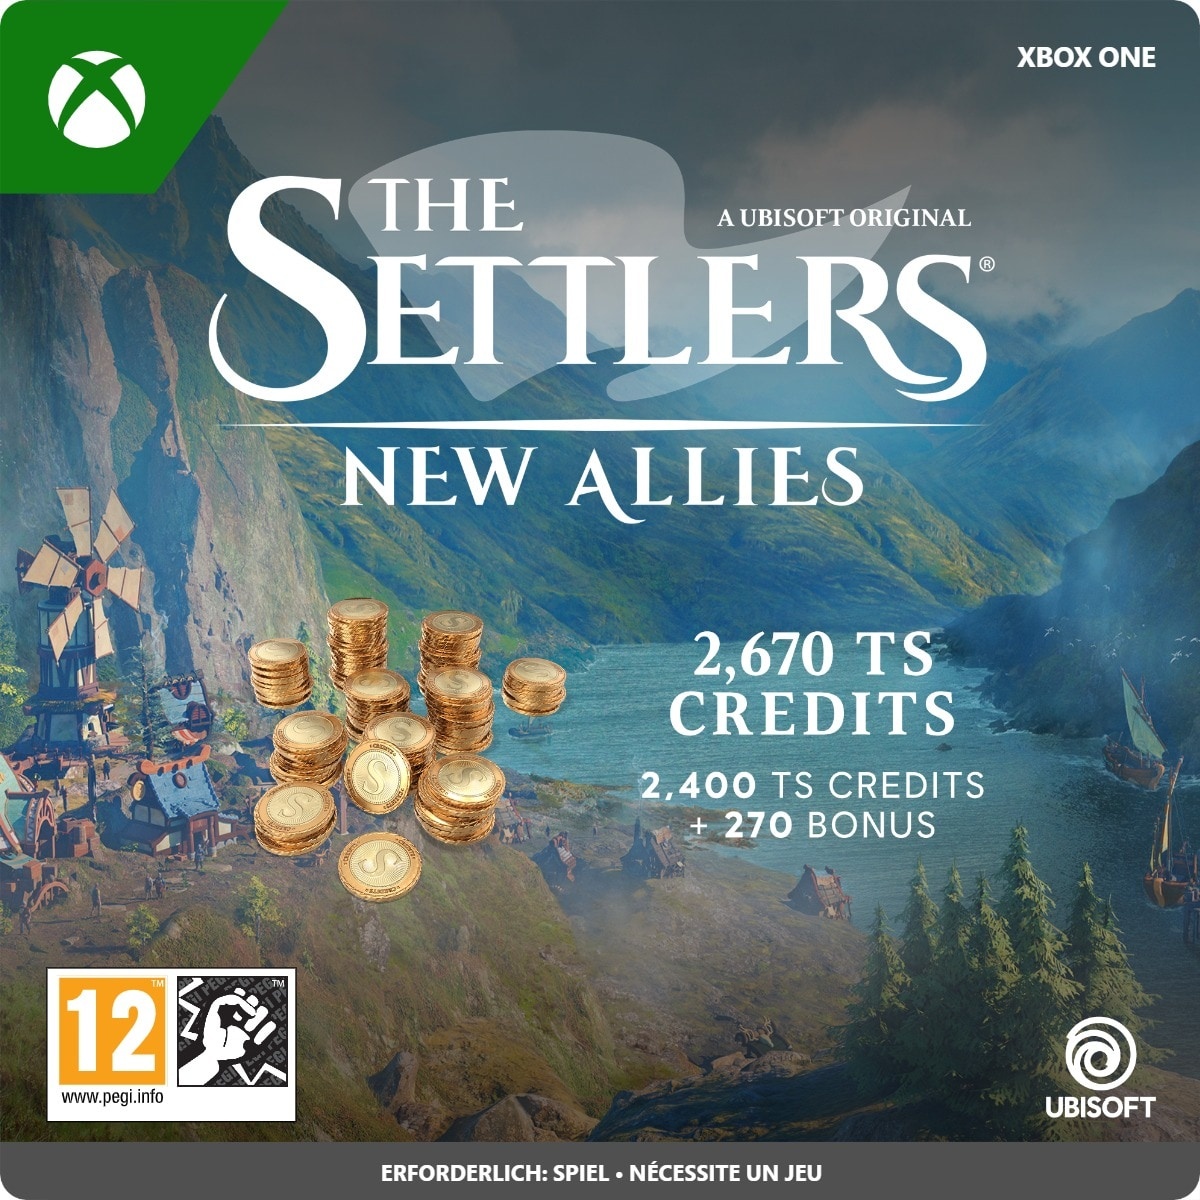 Xbox The Settlers New Allies Virtual Currency 2670 Credits Download Code (Xbox) zum Sofortdownload